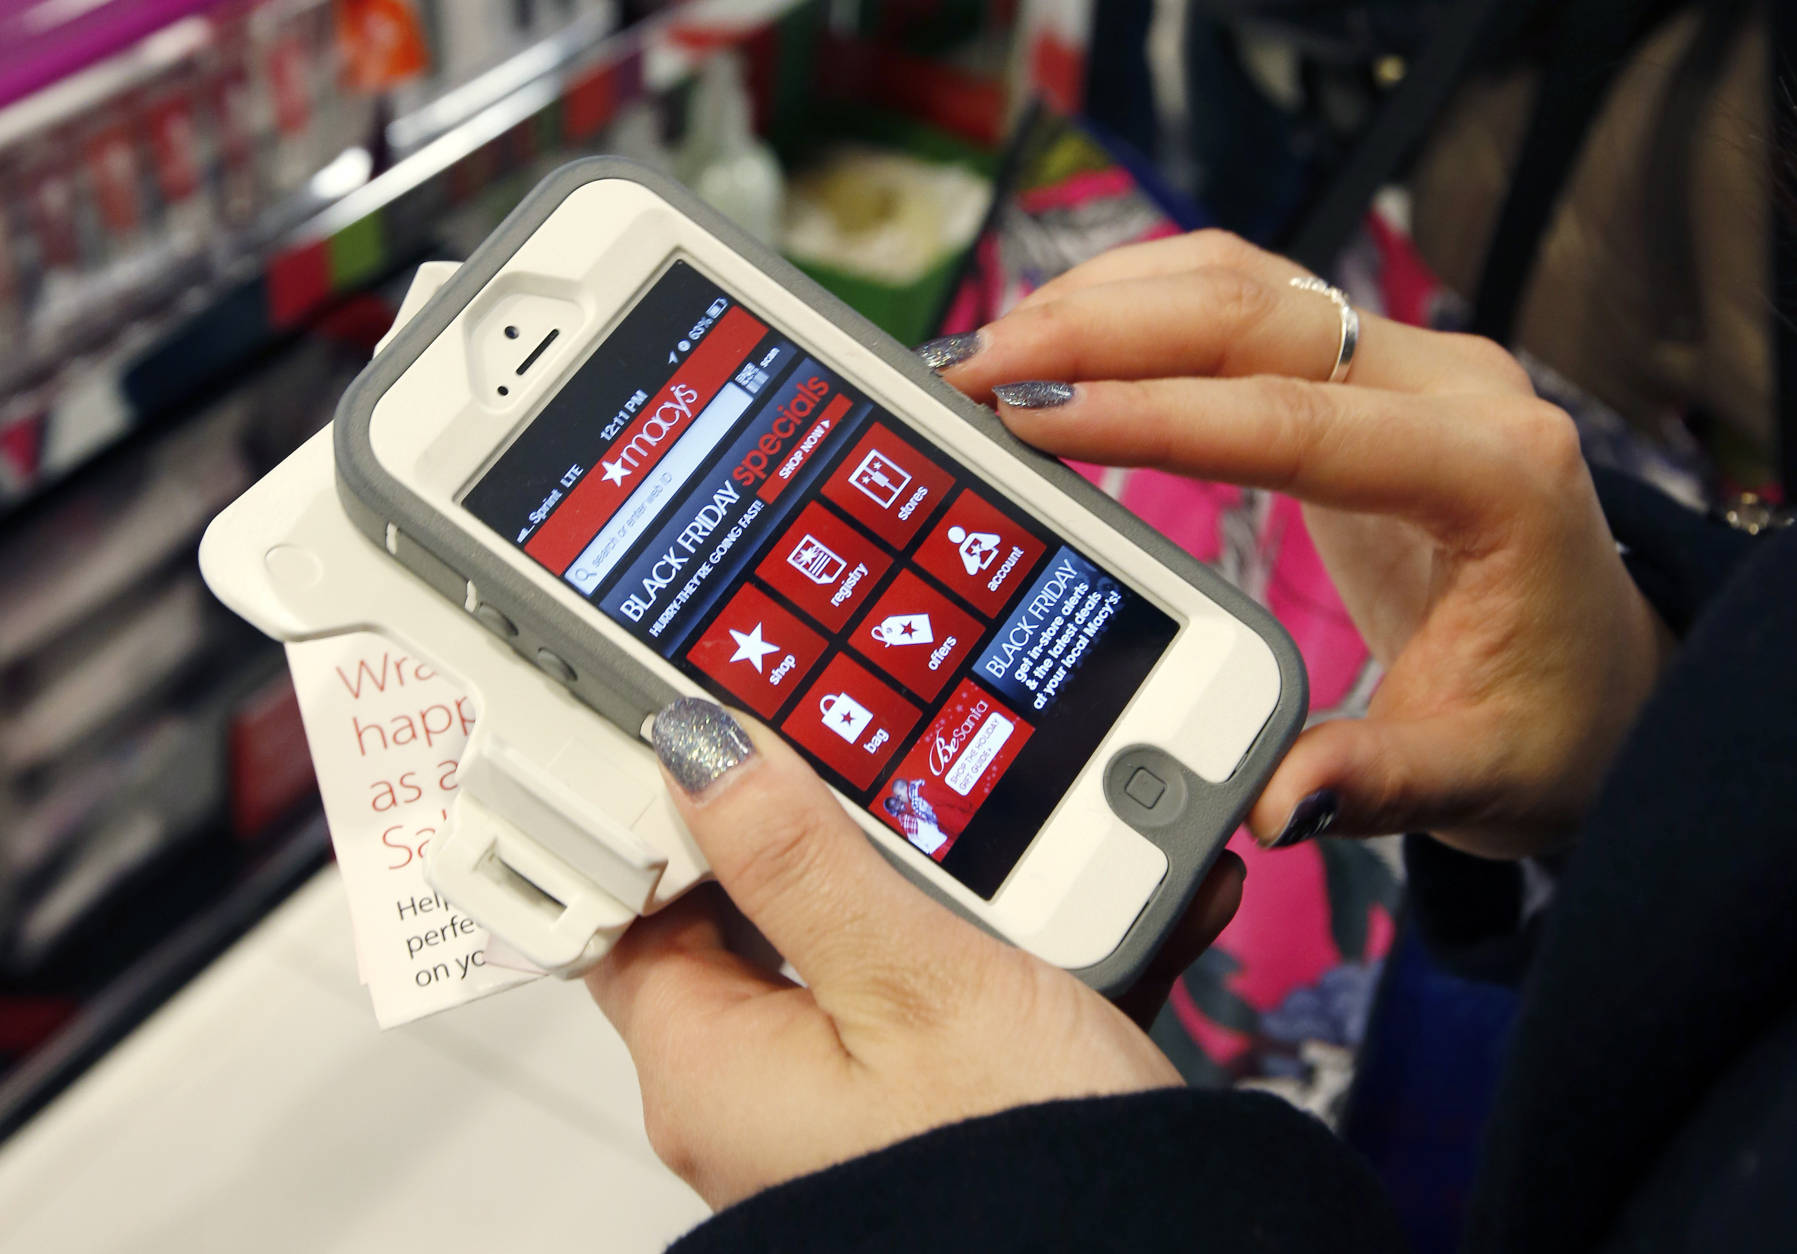 Smartphone apps can help shoppers find coupons, compare prices or price match.  (AP Photo/Michael Dwyer)